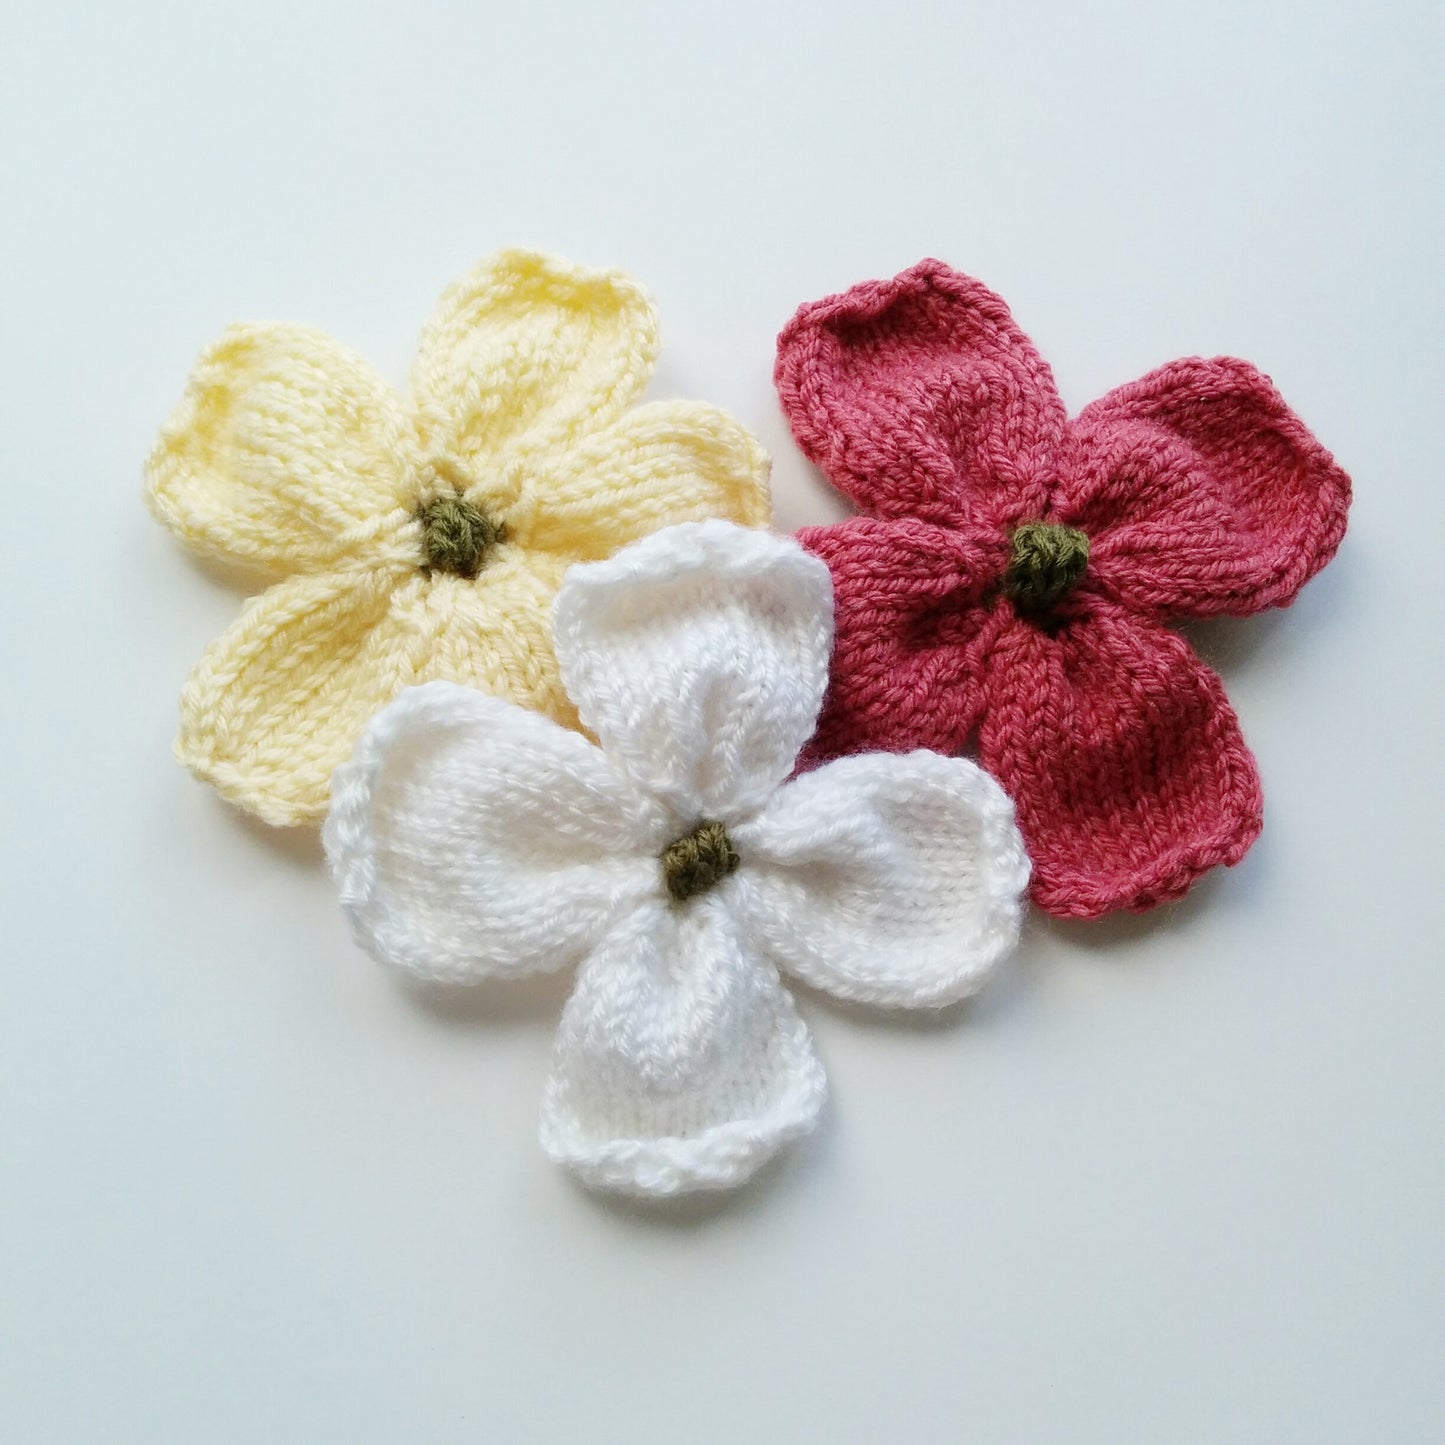 Class: Knitted Dogwood Blossoms